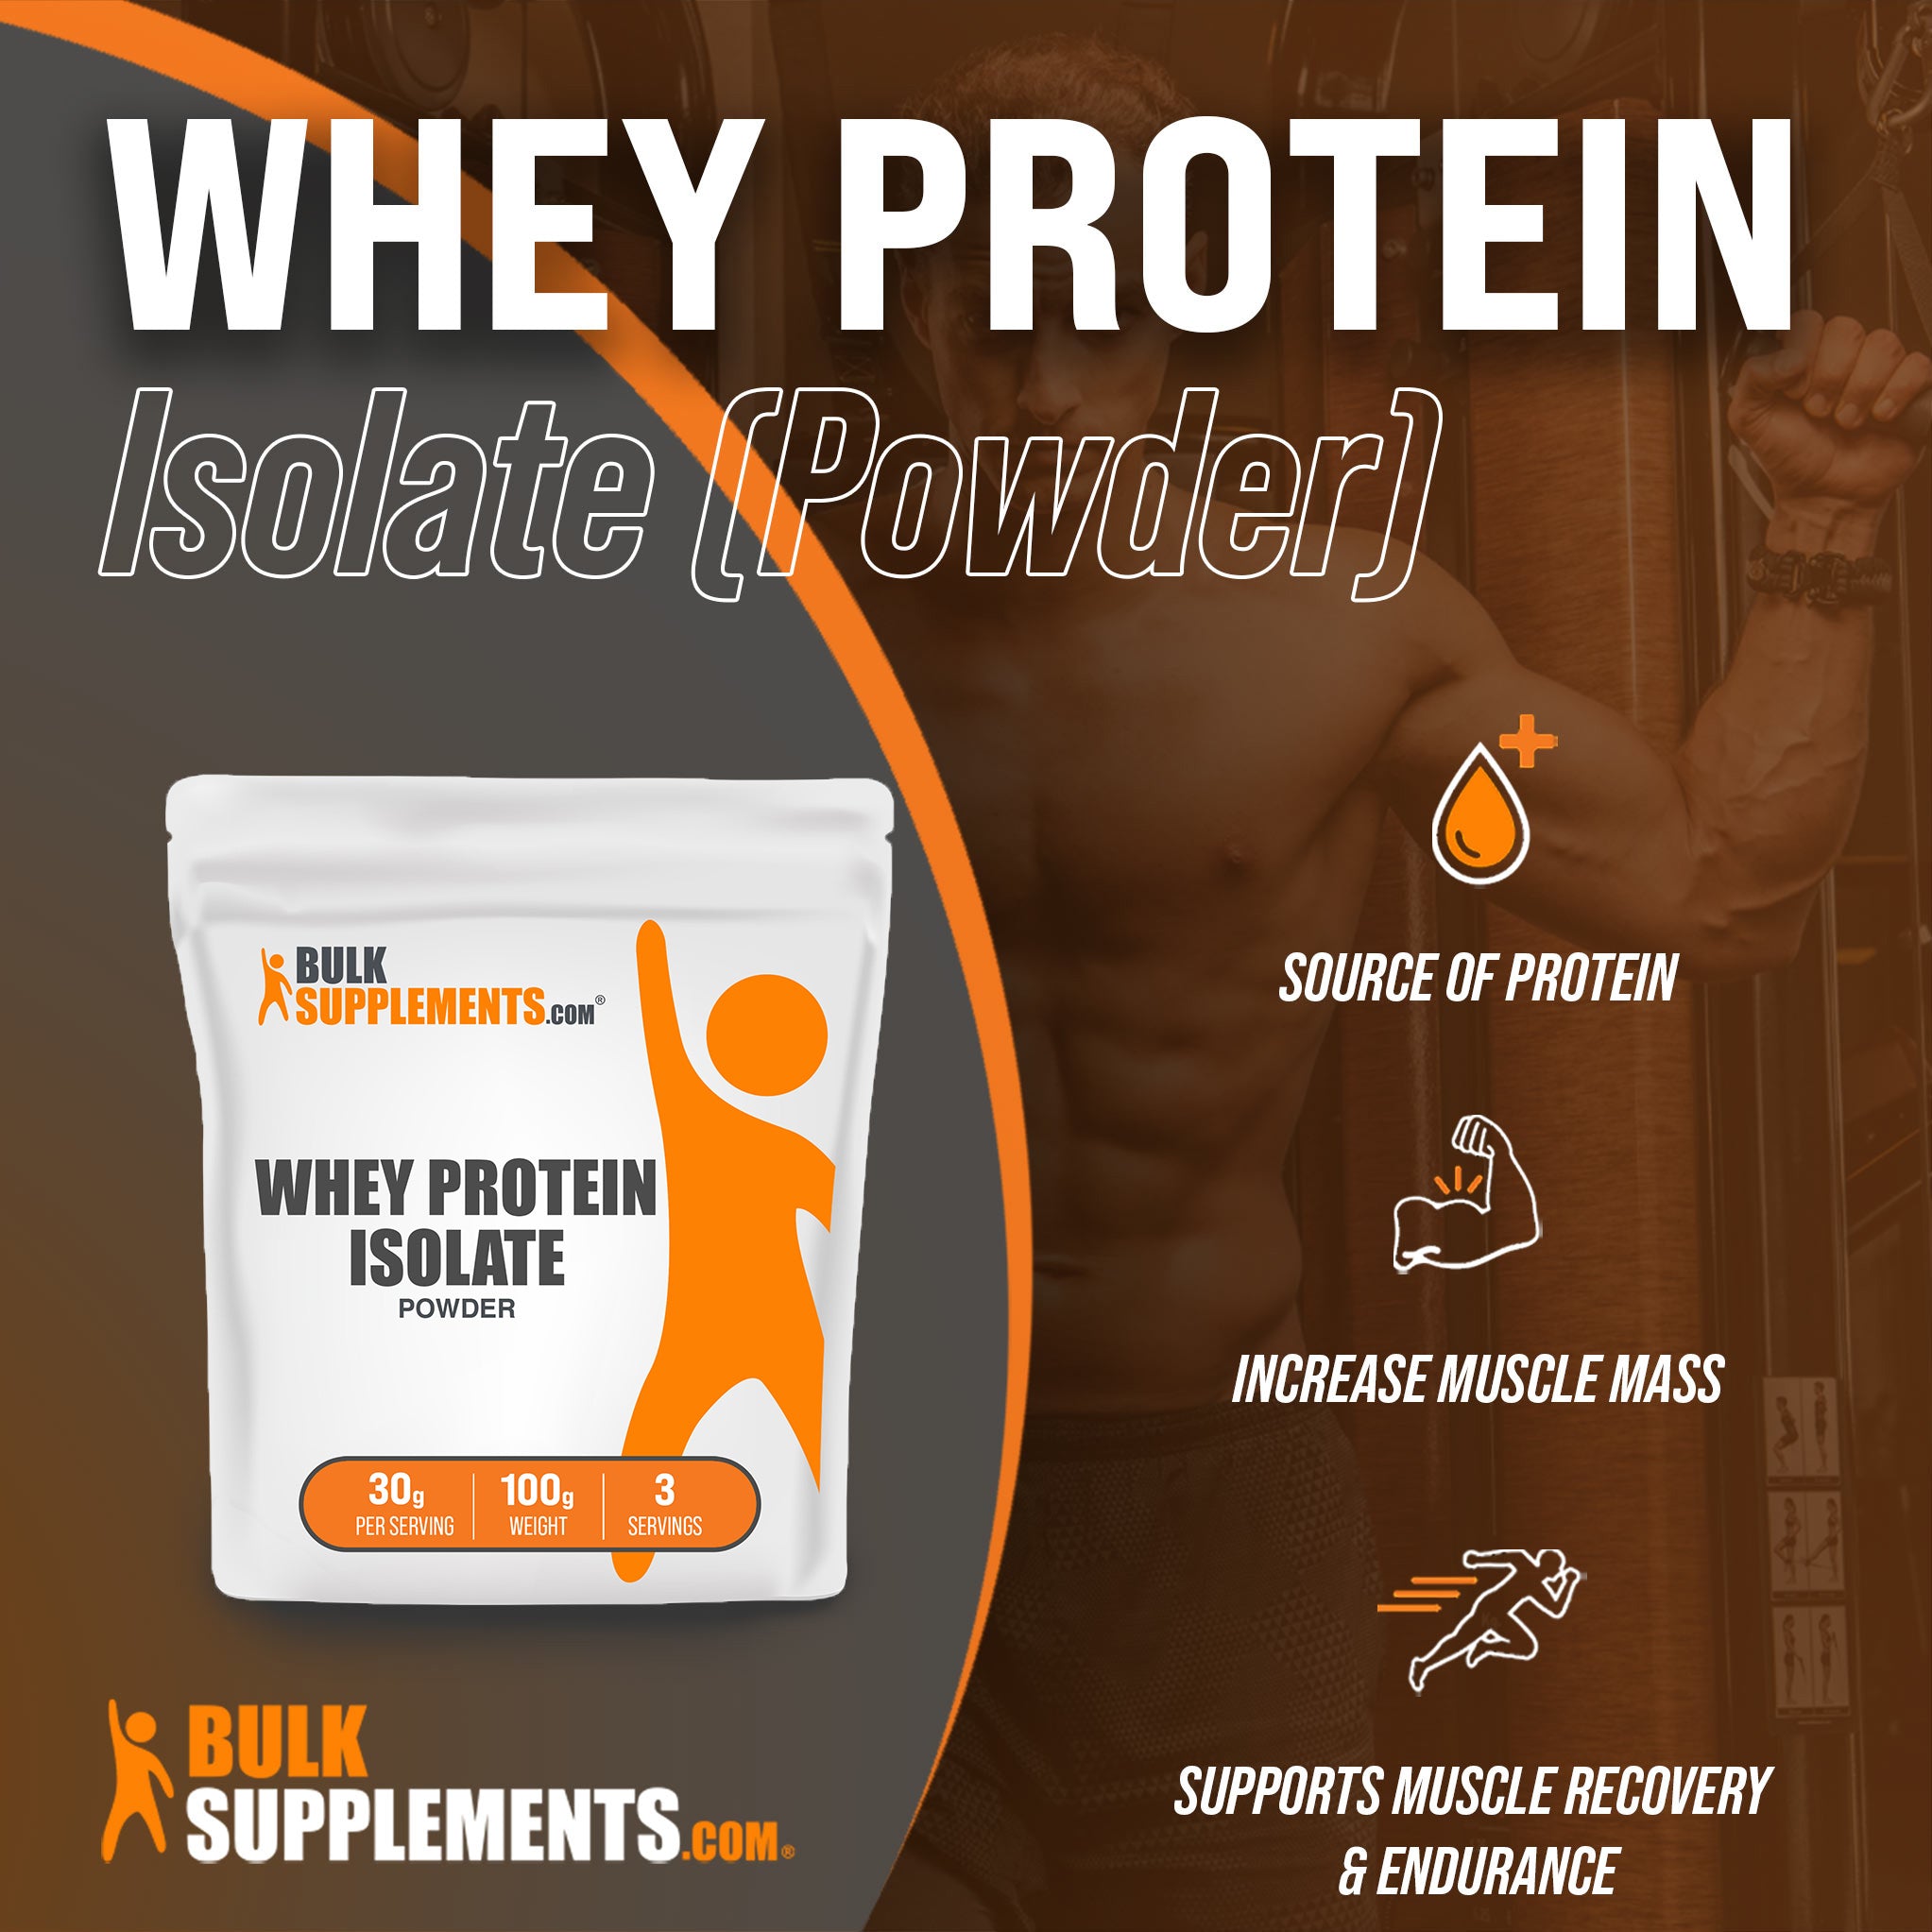 BulkSupplements.com Whey Protein Isolate Powder - Protein Supplement -  Protein Powder Unflavored - 90% (1 Kilogram - 2.2 lbs) 